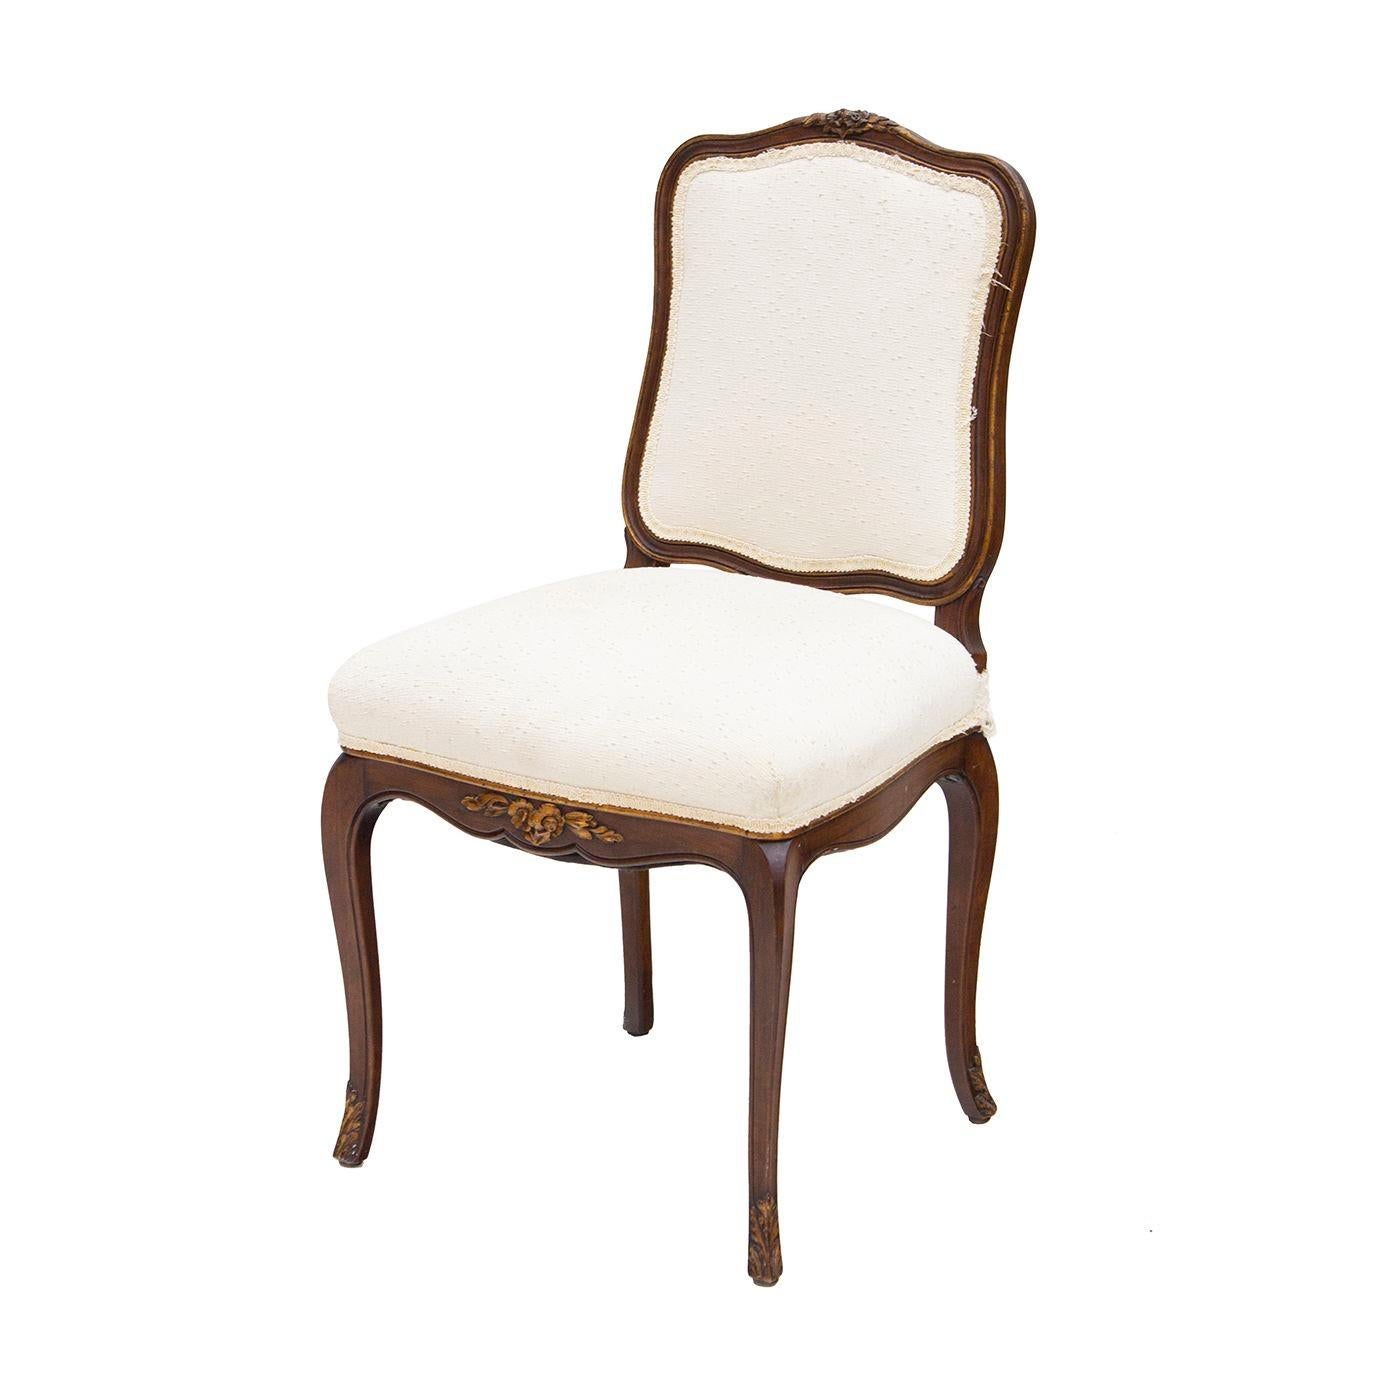 USA, 1960s
Sweet little French style side chair with nice carved detail to the frame. A really nice scale to this piece. It would be a great desk or side chair for a guest room. No maker's marks remain, likely Baker, Kindel, or Henredon.